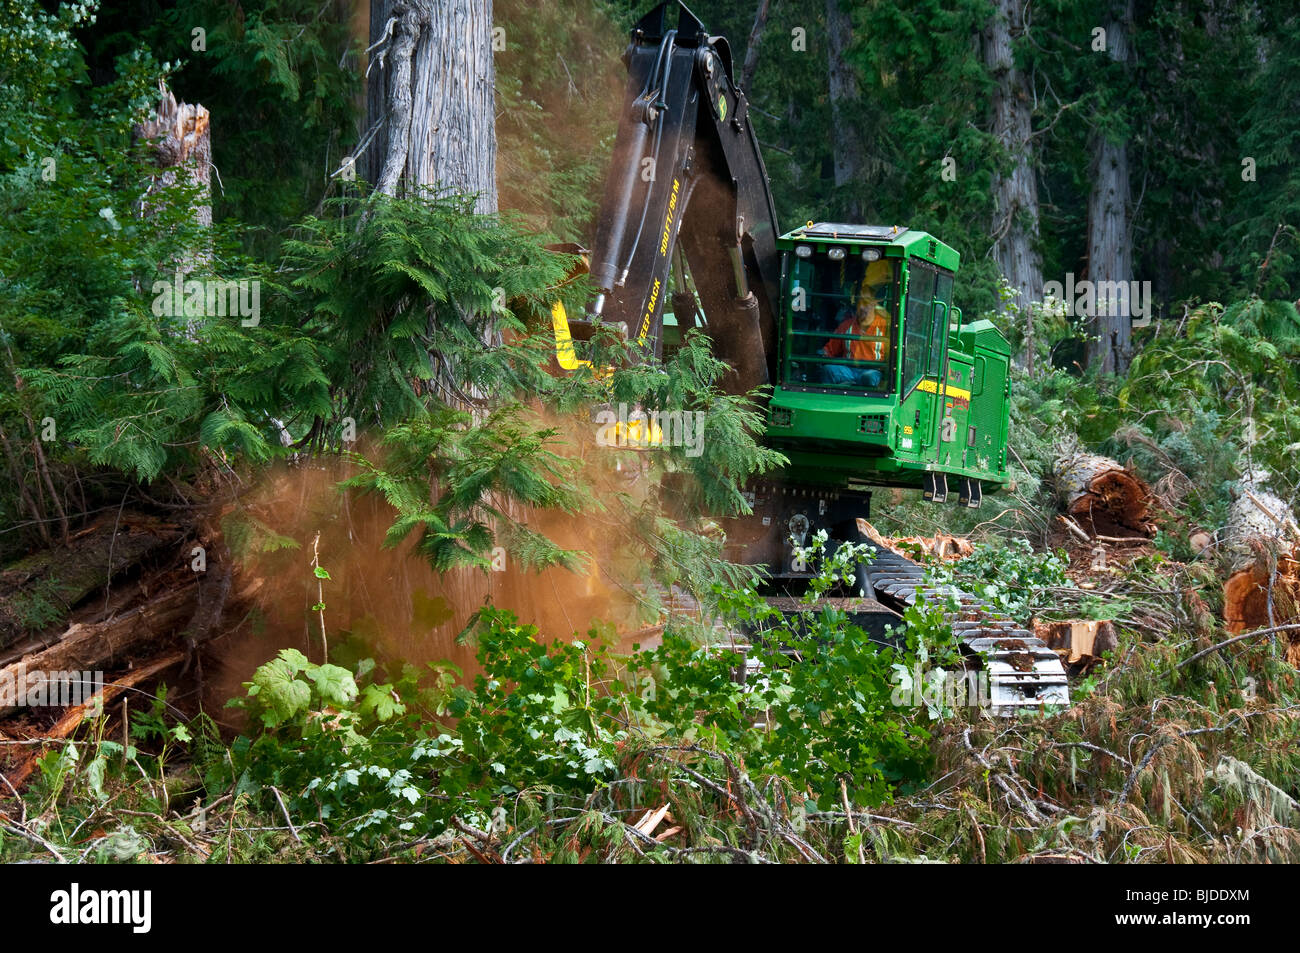 Cutting down a tree. Stock Photo